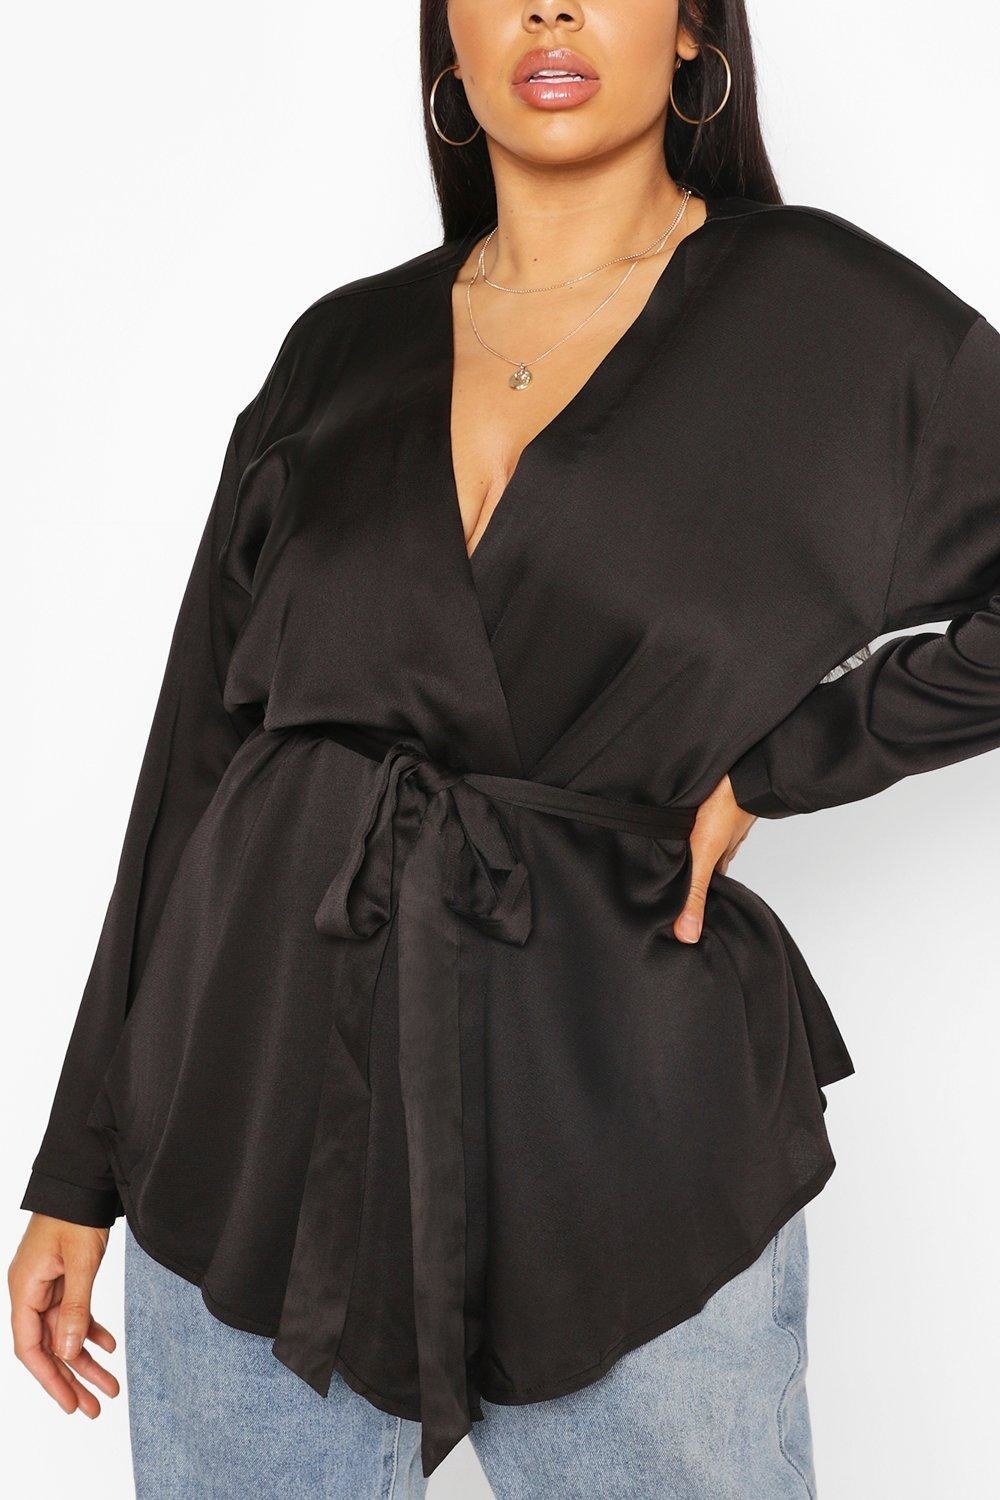 The long-sleeve satin top tied loosely on a model